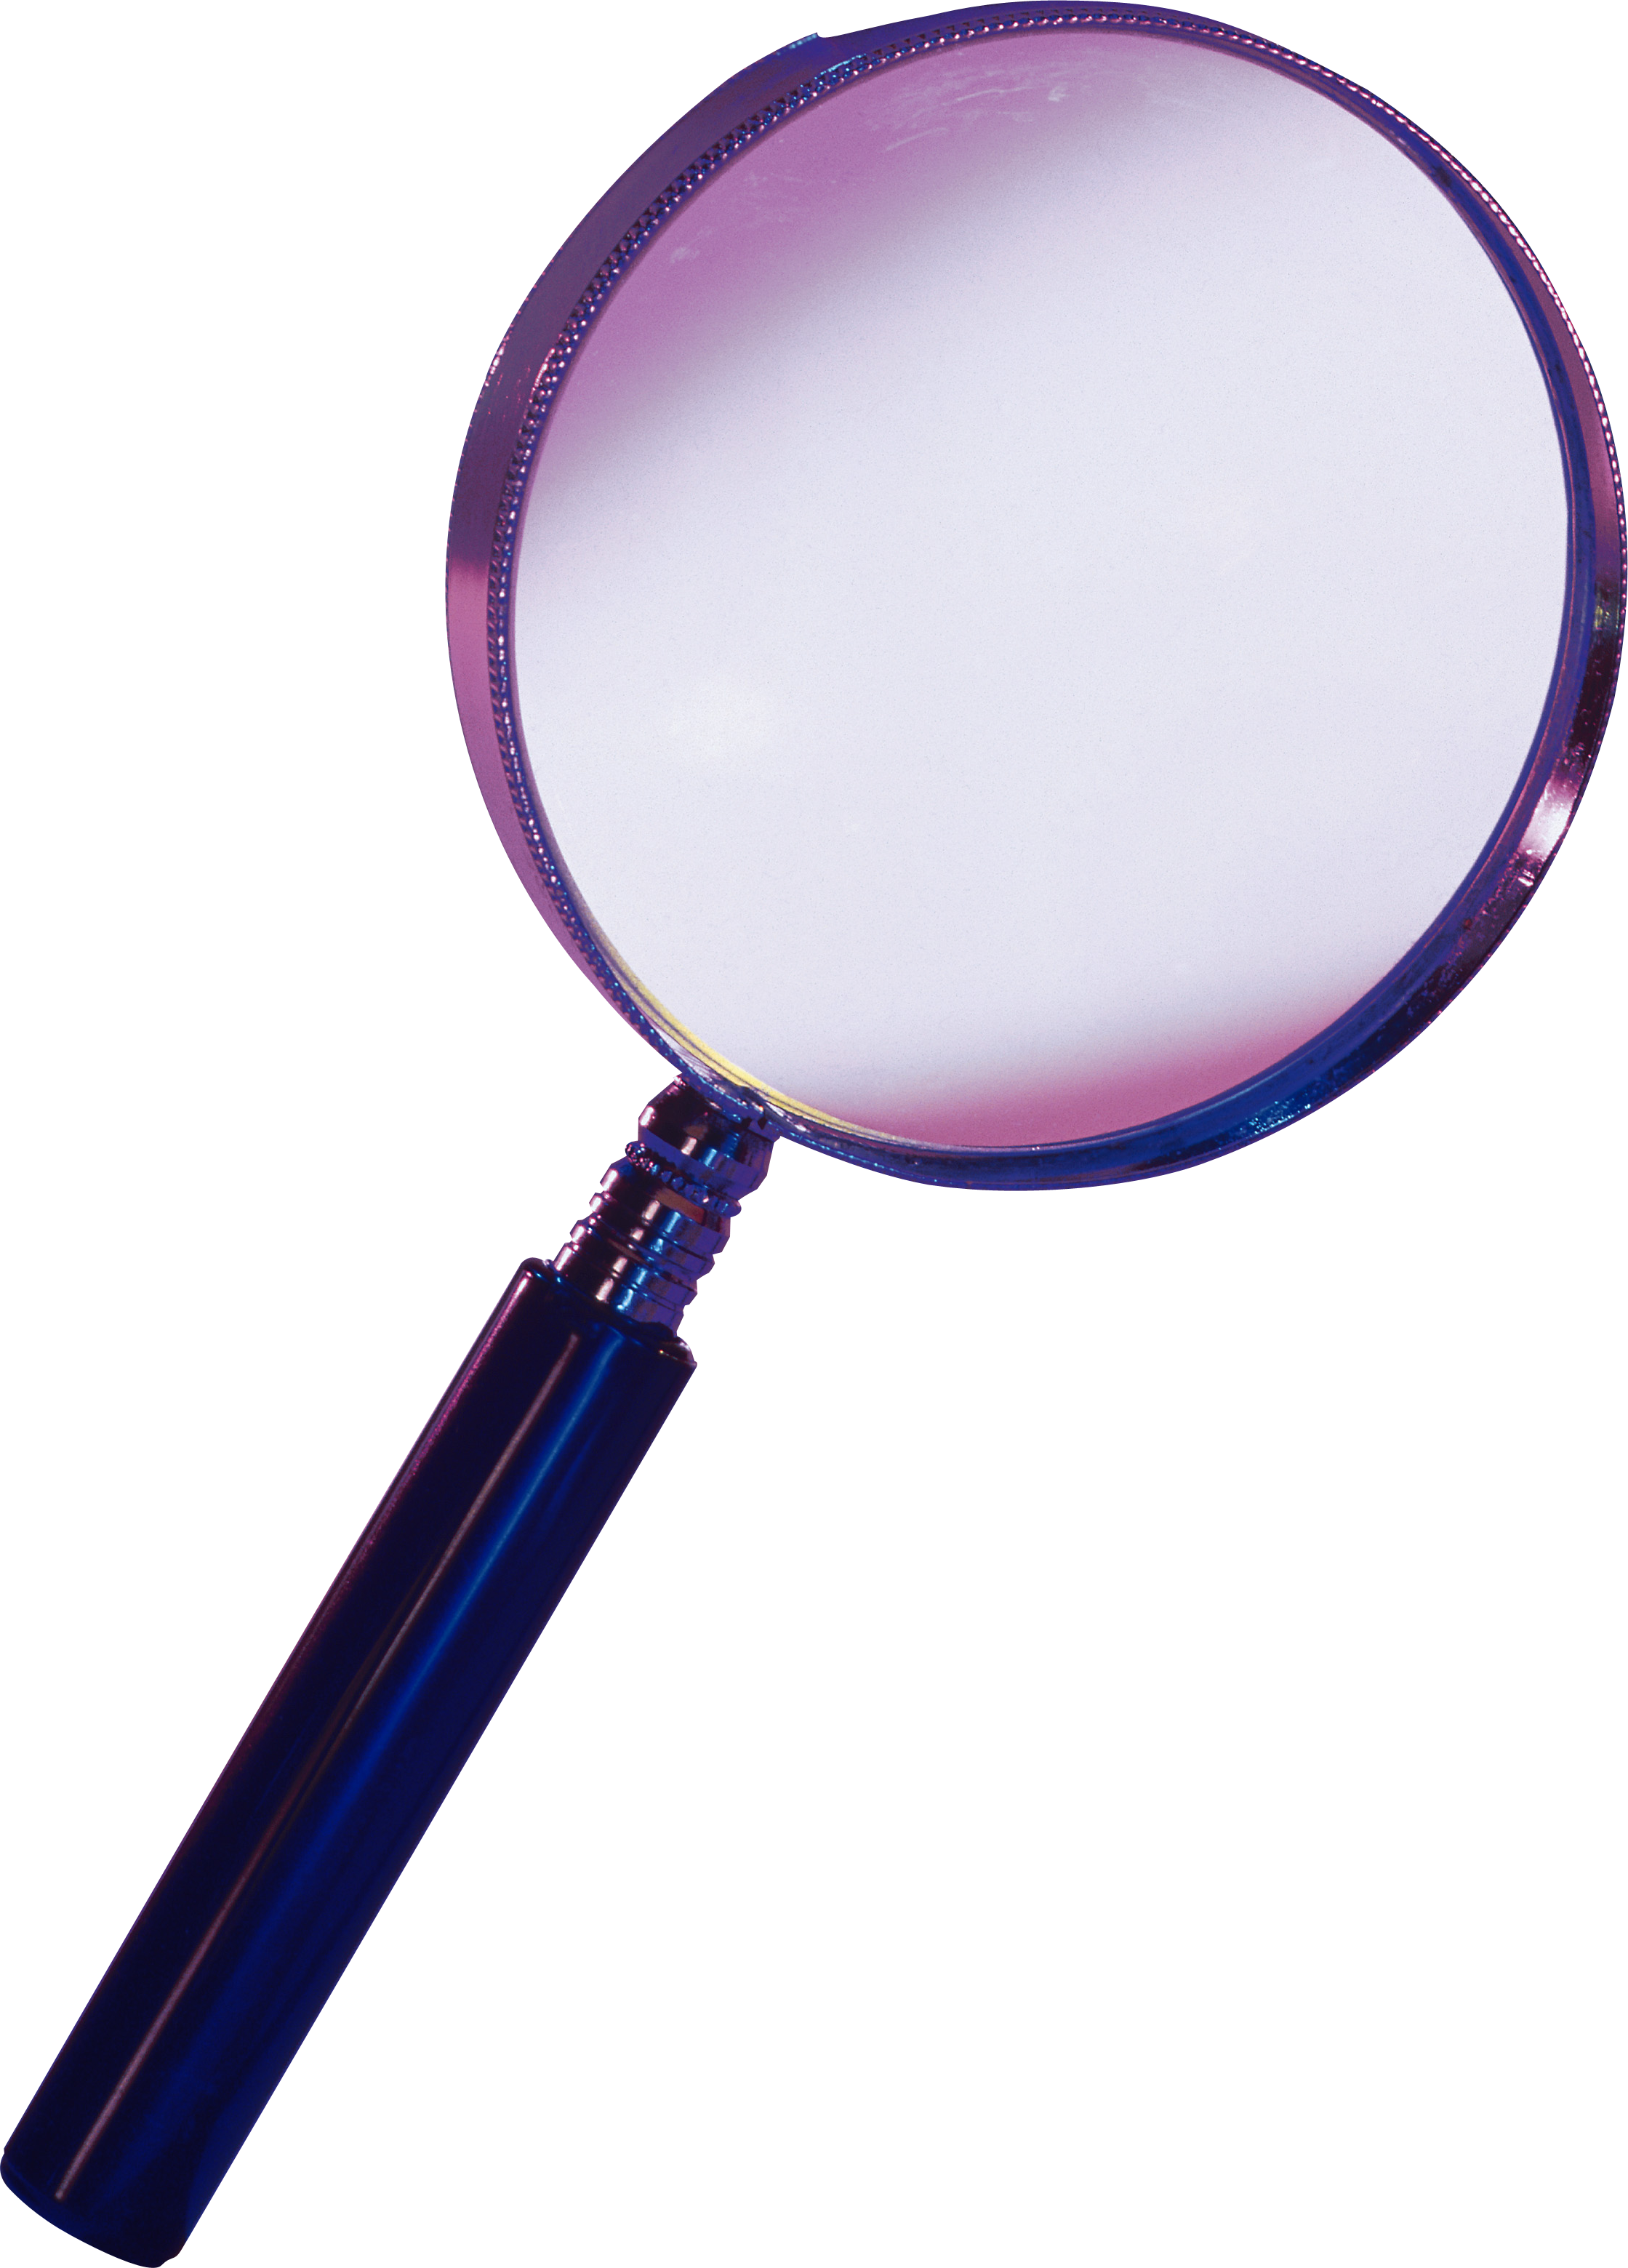 Loupe PNG transparent image download, size: 1432x912px